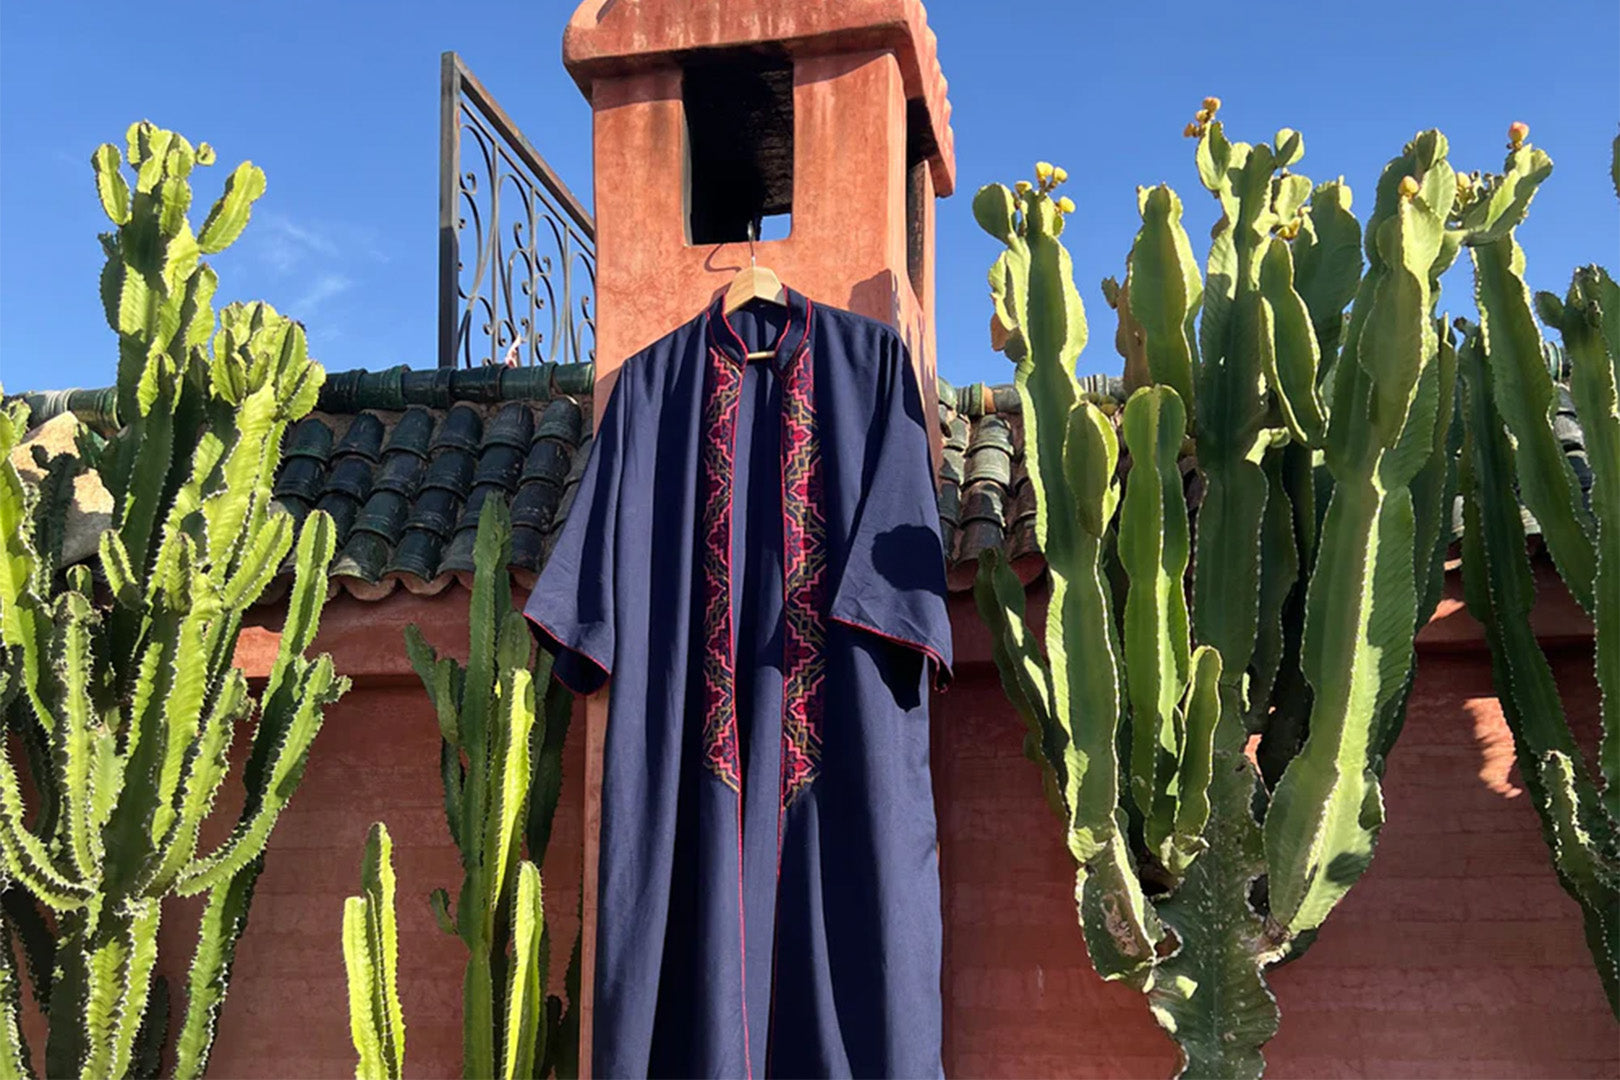 A vibrant fashion garment displayed outdoors, surrounded by cacti, symbolizing the integration of nature in eco-friendly fashion.